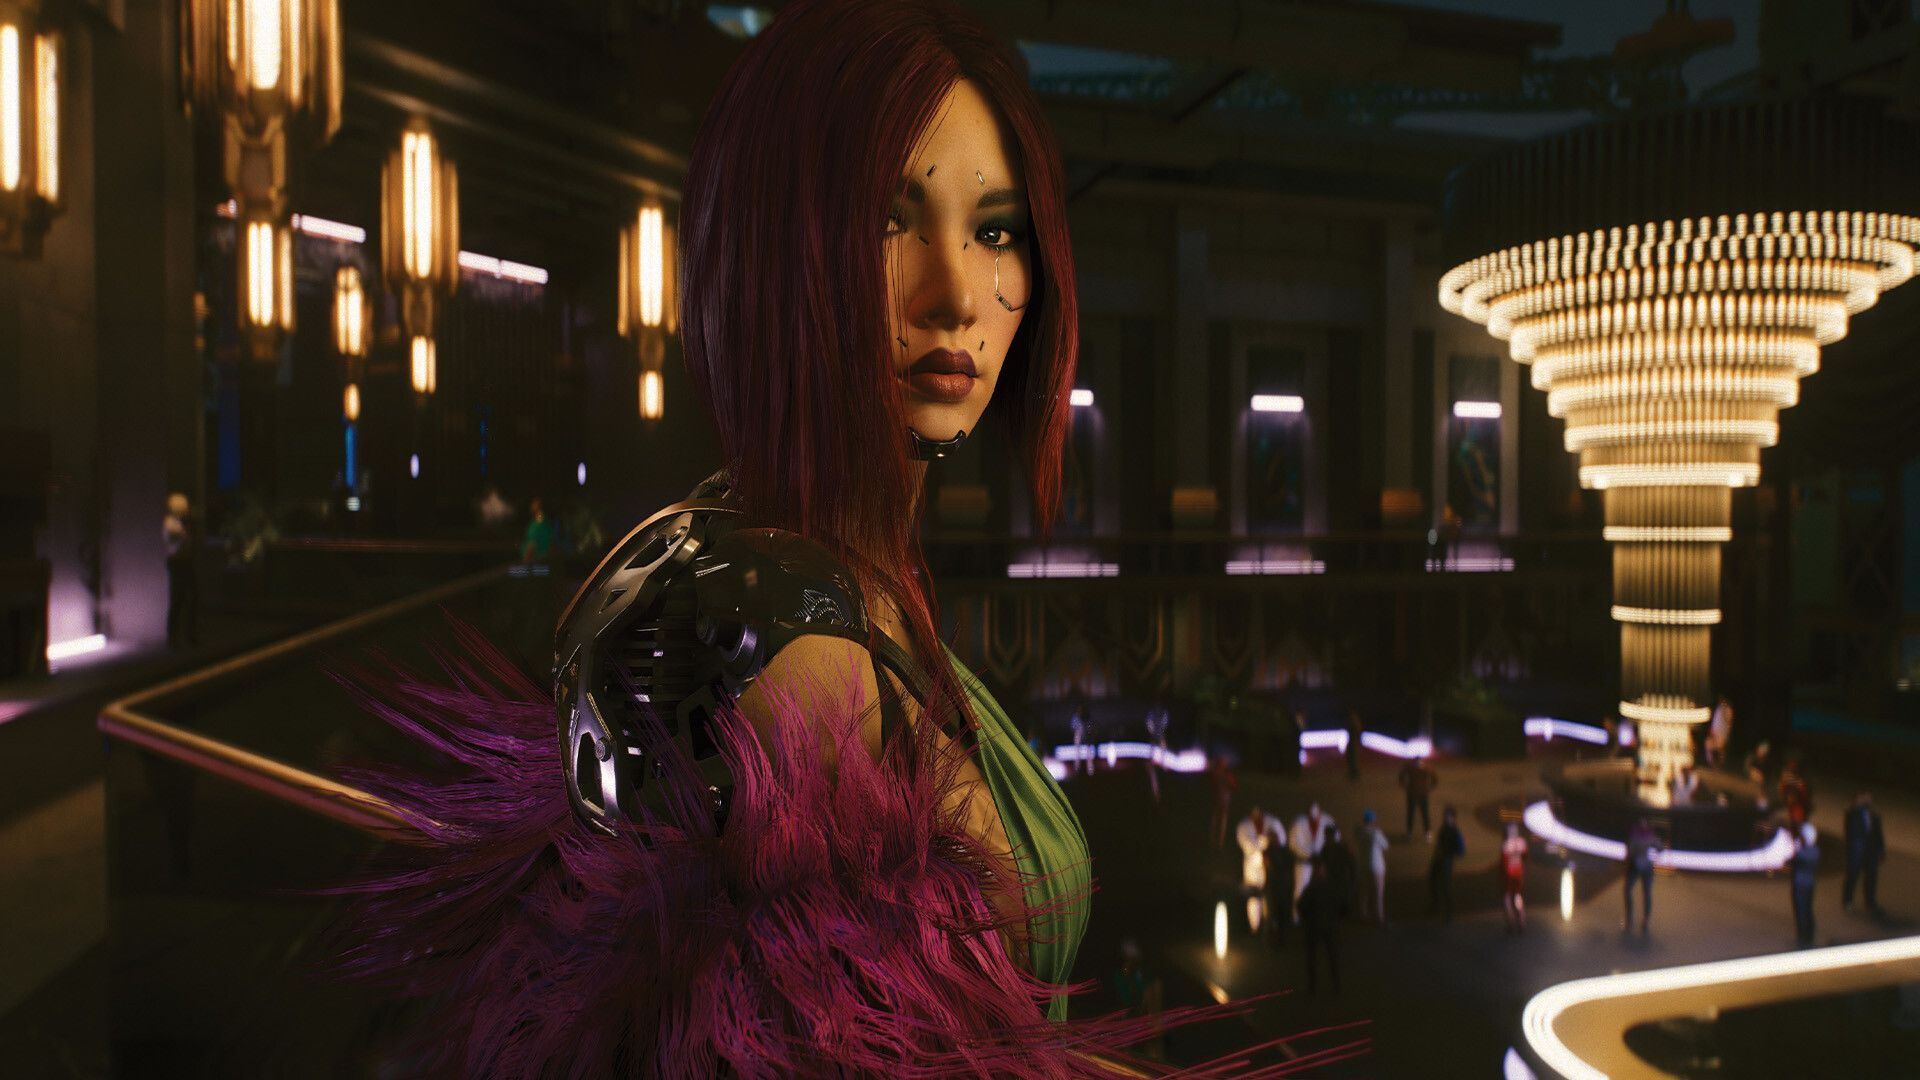 10 Best Cyberpunk-Themed Video Games, According To Metacritic